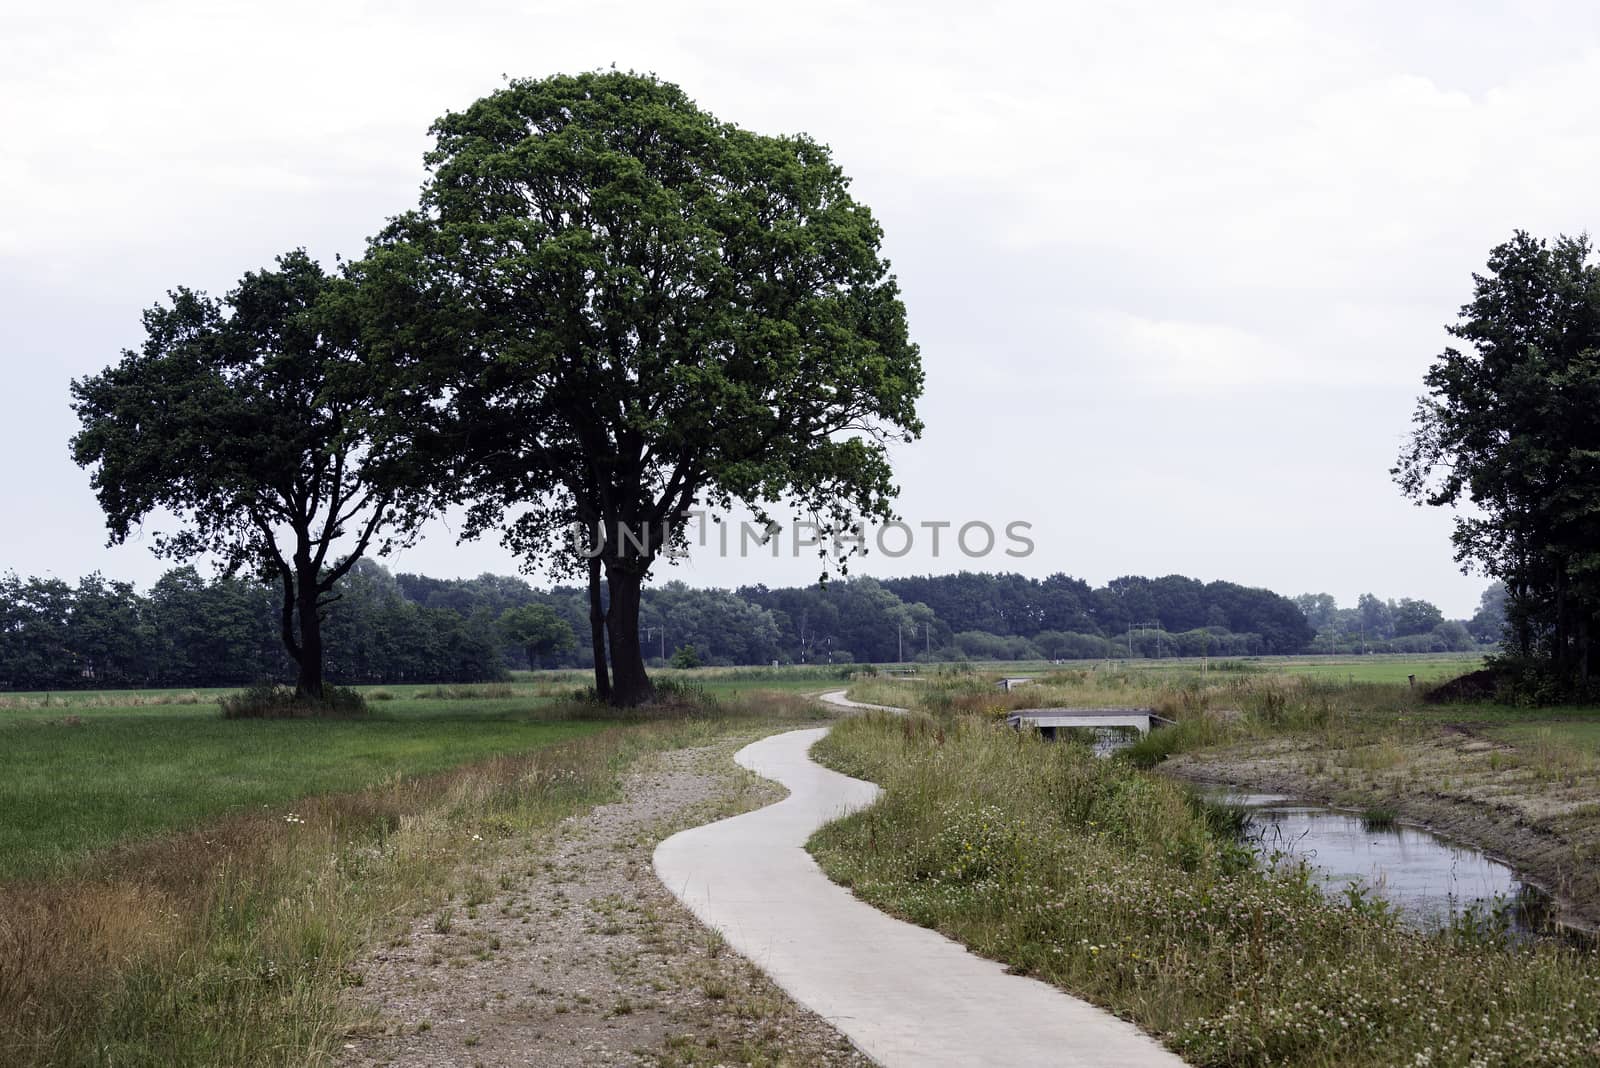 dutch nature with big trees and fields by compuinfoto